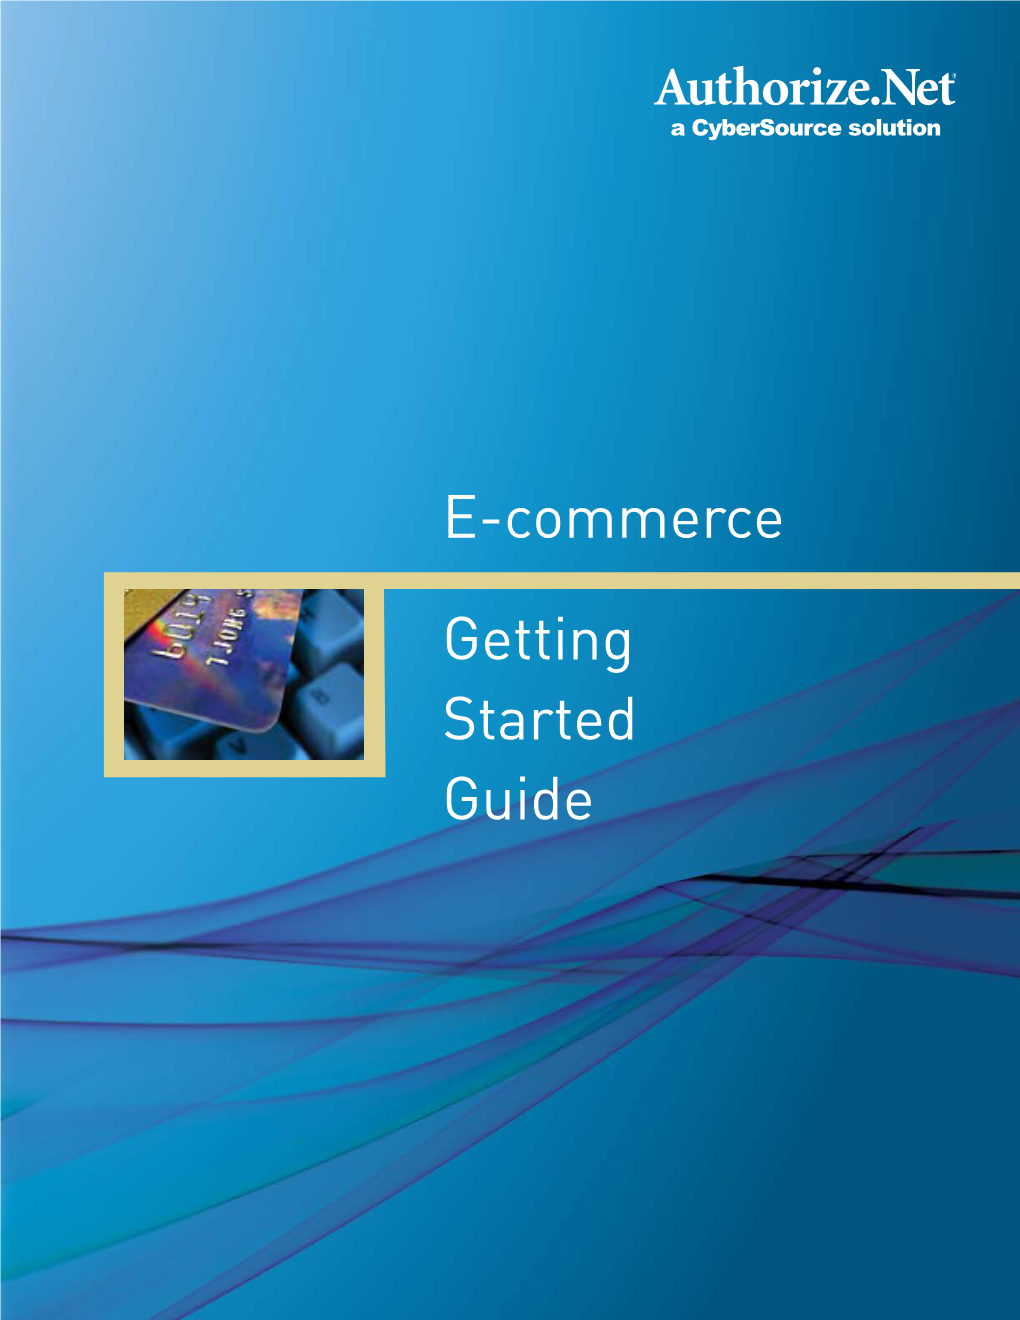 E-Commerce Getting Started Guide, We Hope We’Ve Eliminated Some of the Uncertainty That Can Naturally Surface When a Business Is Presented with a New Opportunity